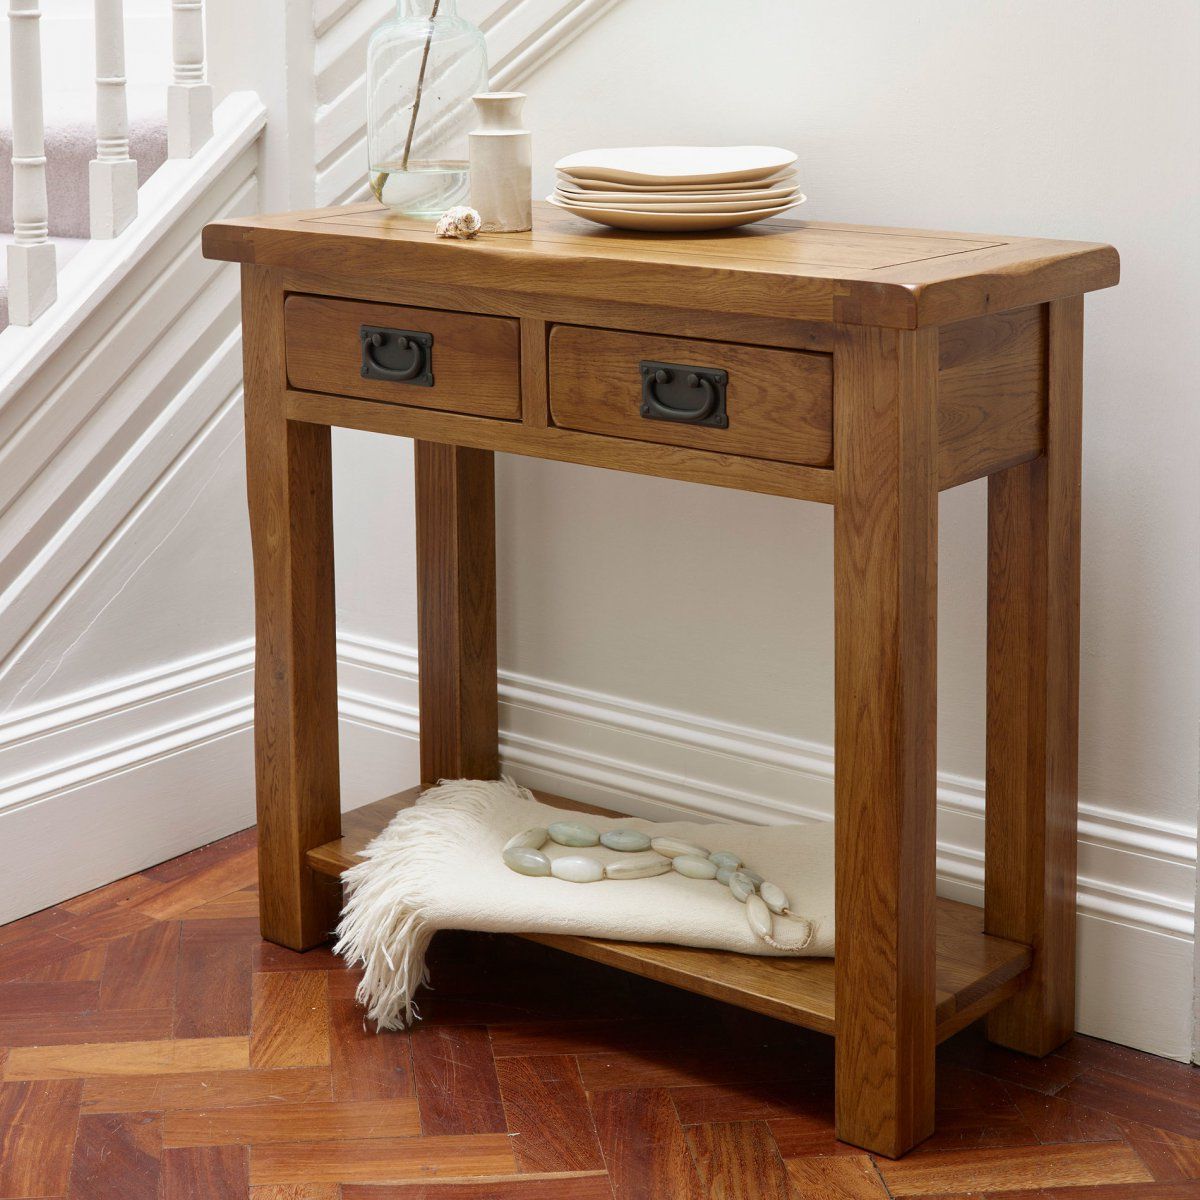 Original Rustic 2 Drawer Console Table In Solid Oak Within Recent 2 Drawer Oval Console Tables (View 10 of 10)